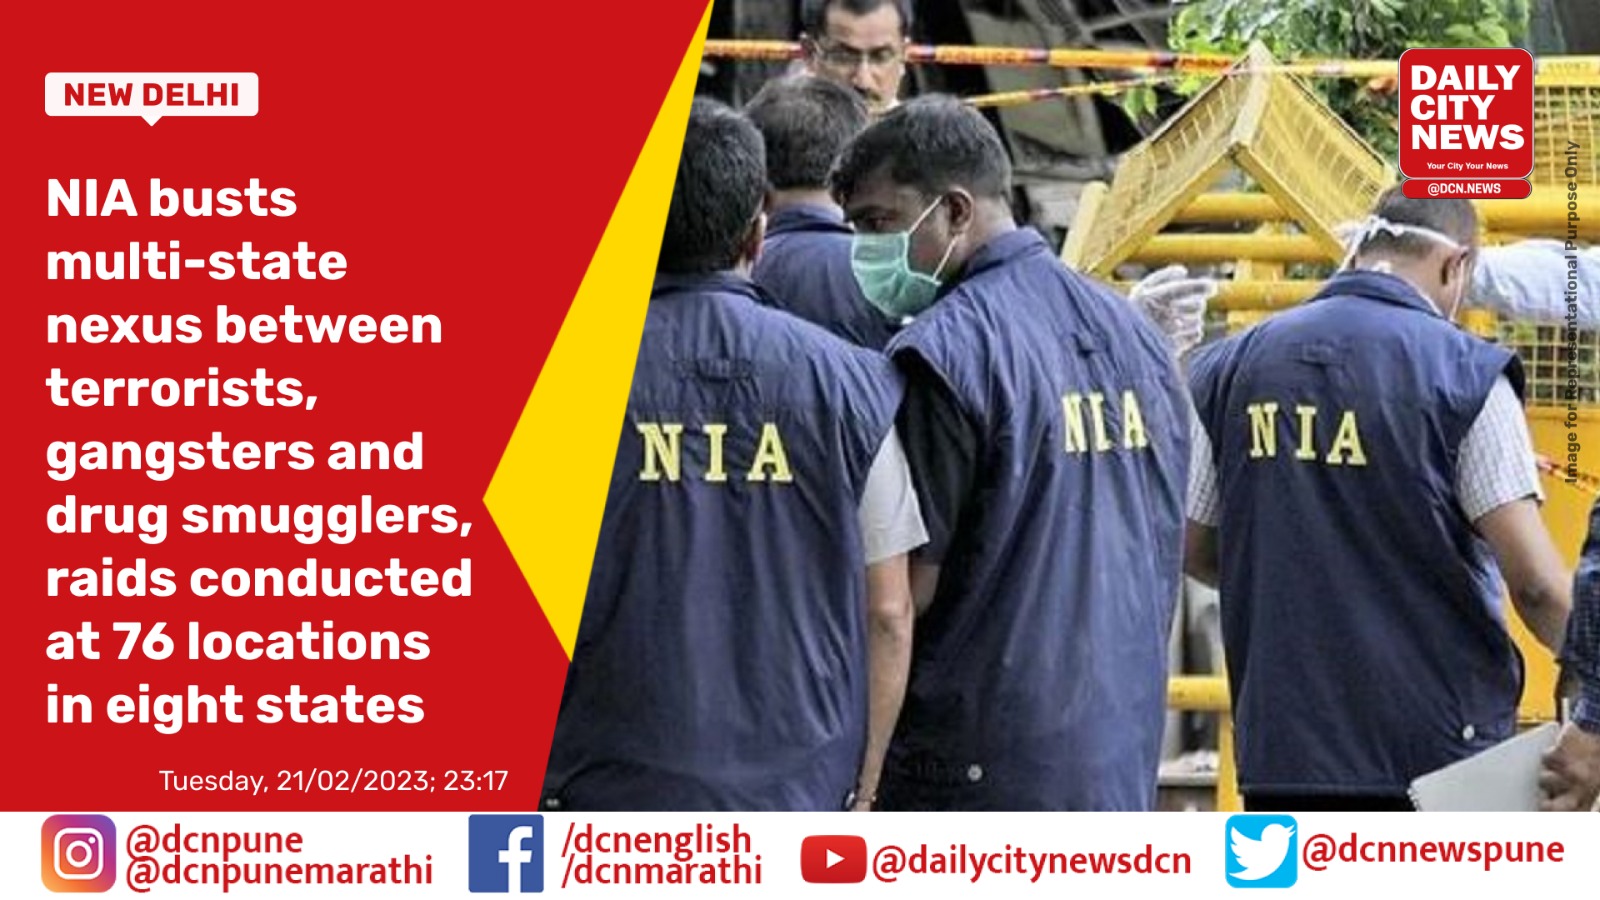 NIA busts multi-state nexus between terrorists, gangsters and drug smugglers, raids conducted at 76 locations in eight states